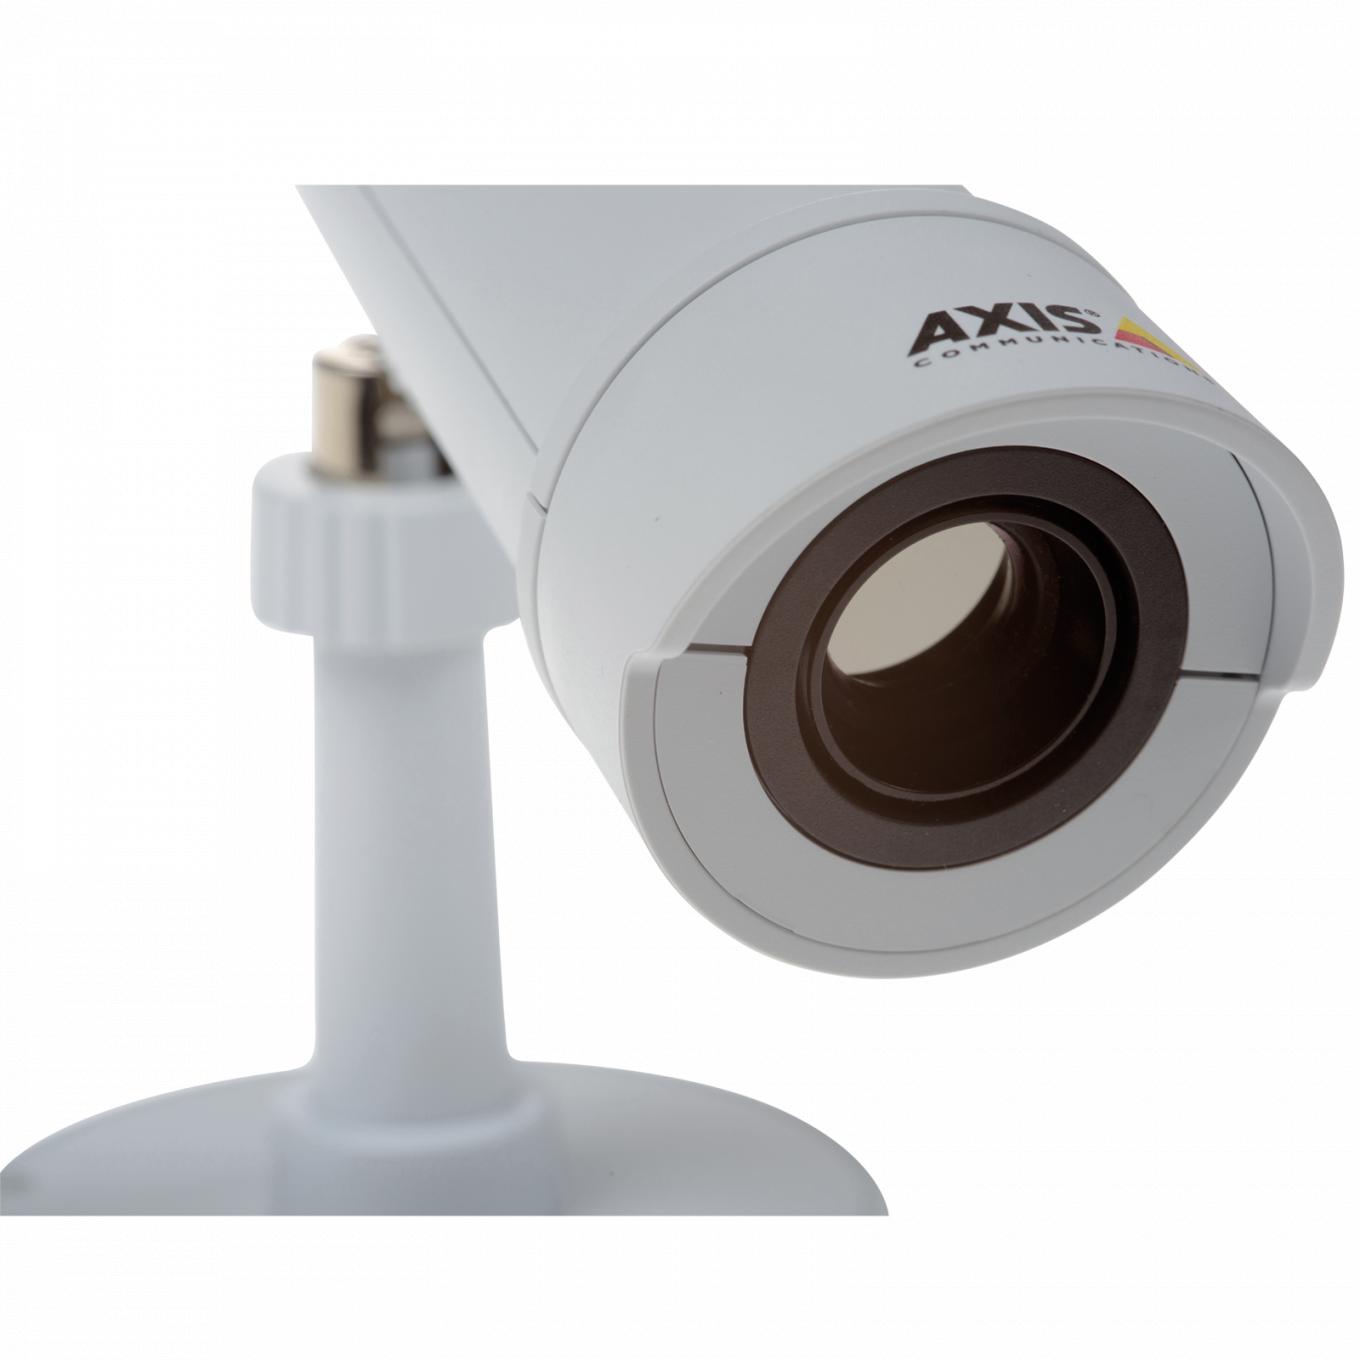 Close-up image of AXIS P1280-E Thermal Network Camera.